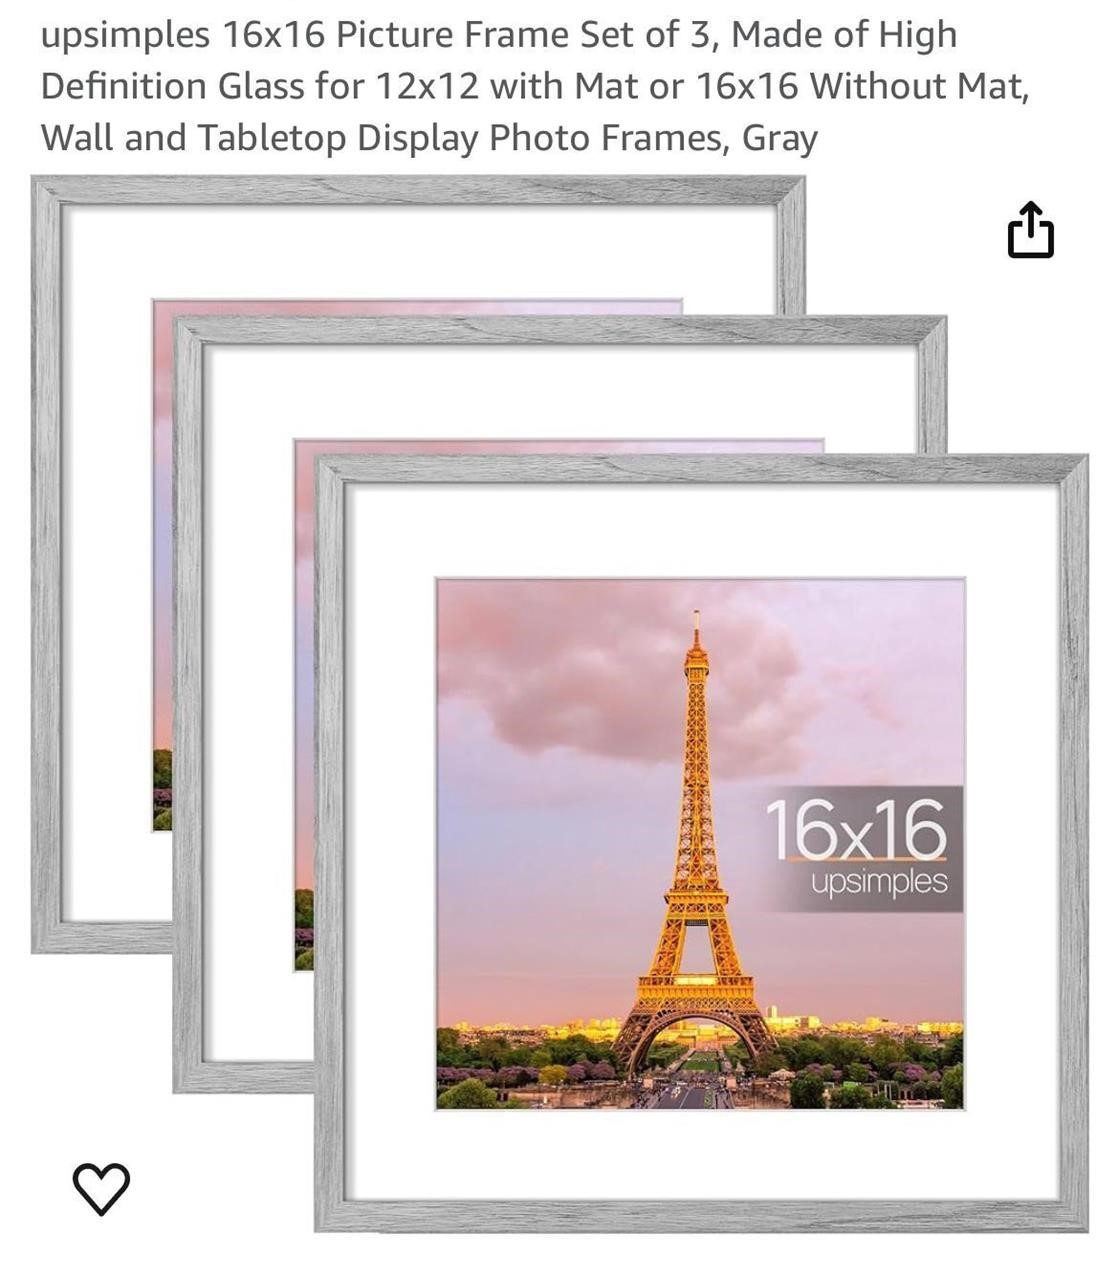 upsimples 16x16 Picture Frame Set of 3